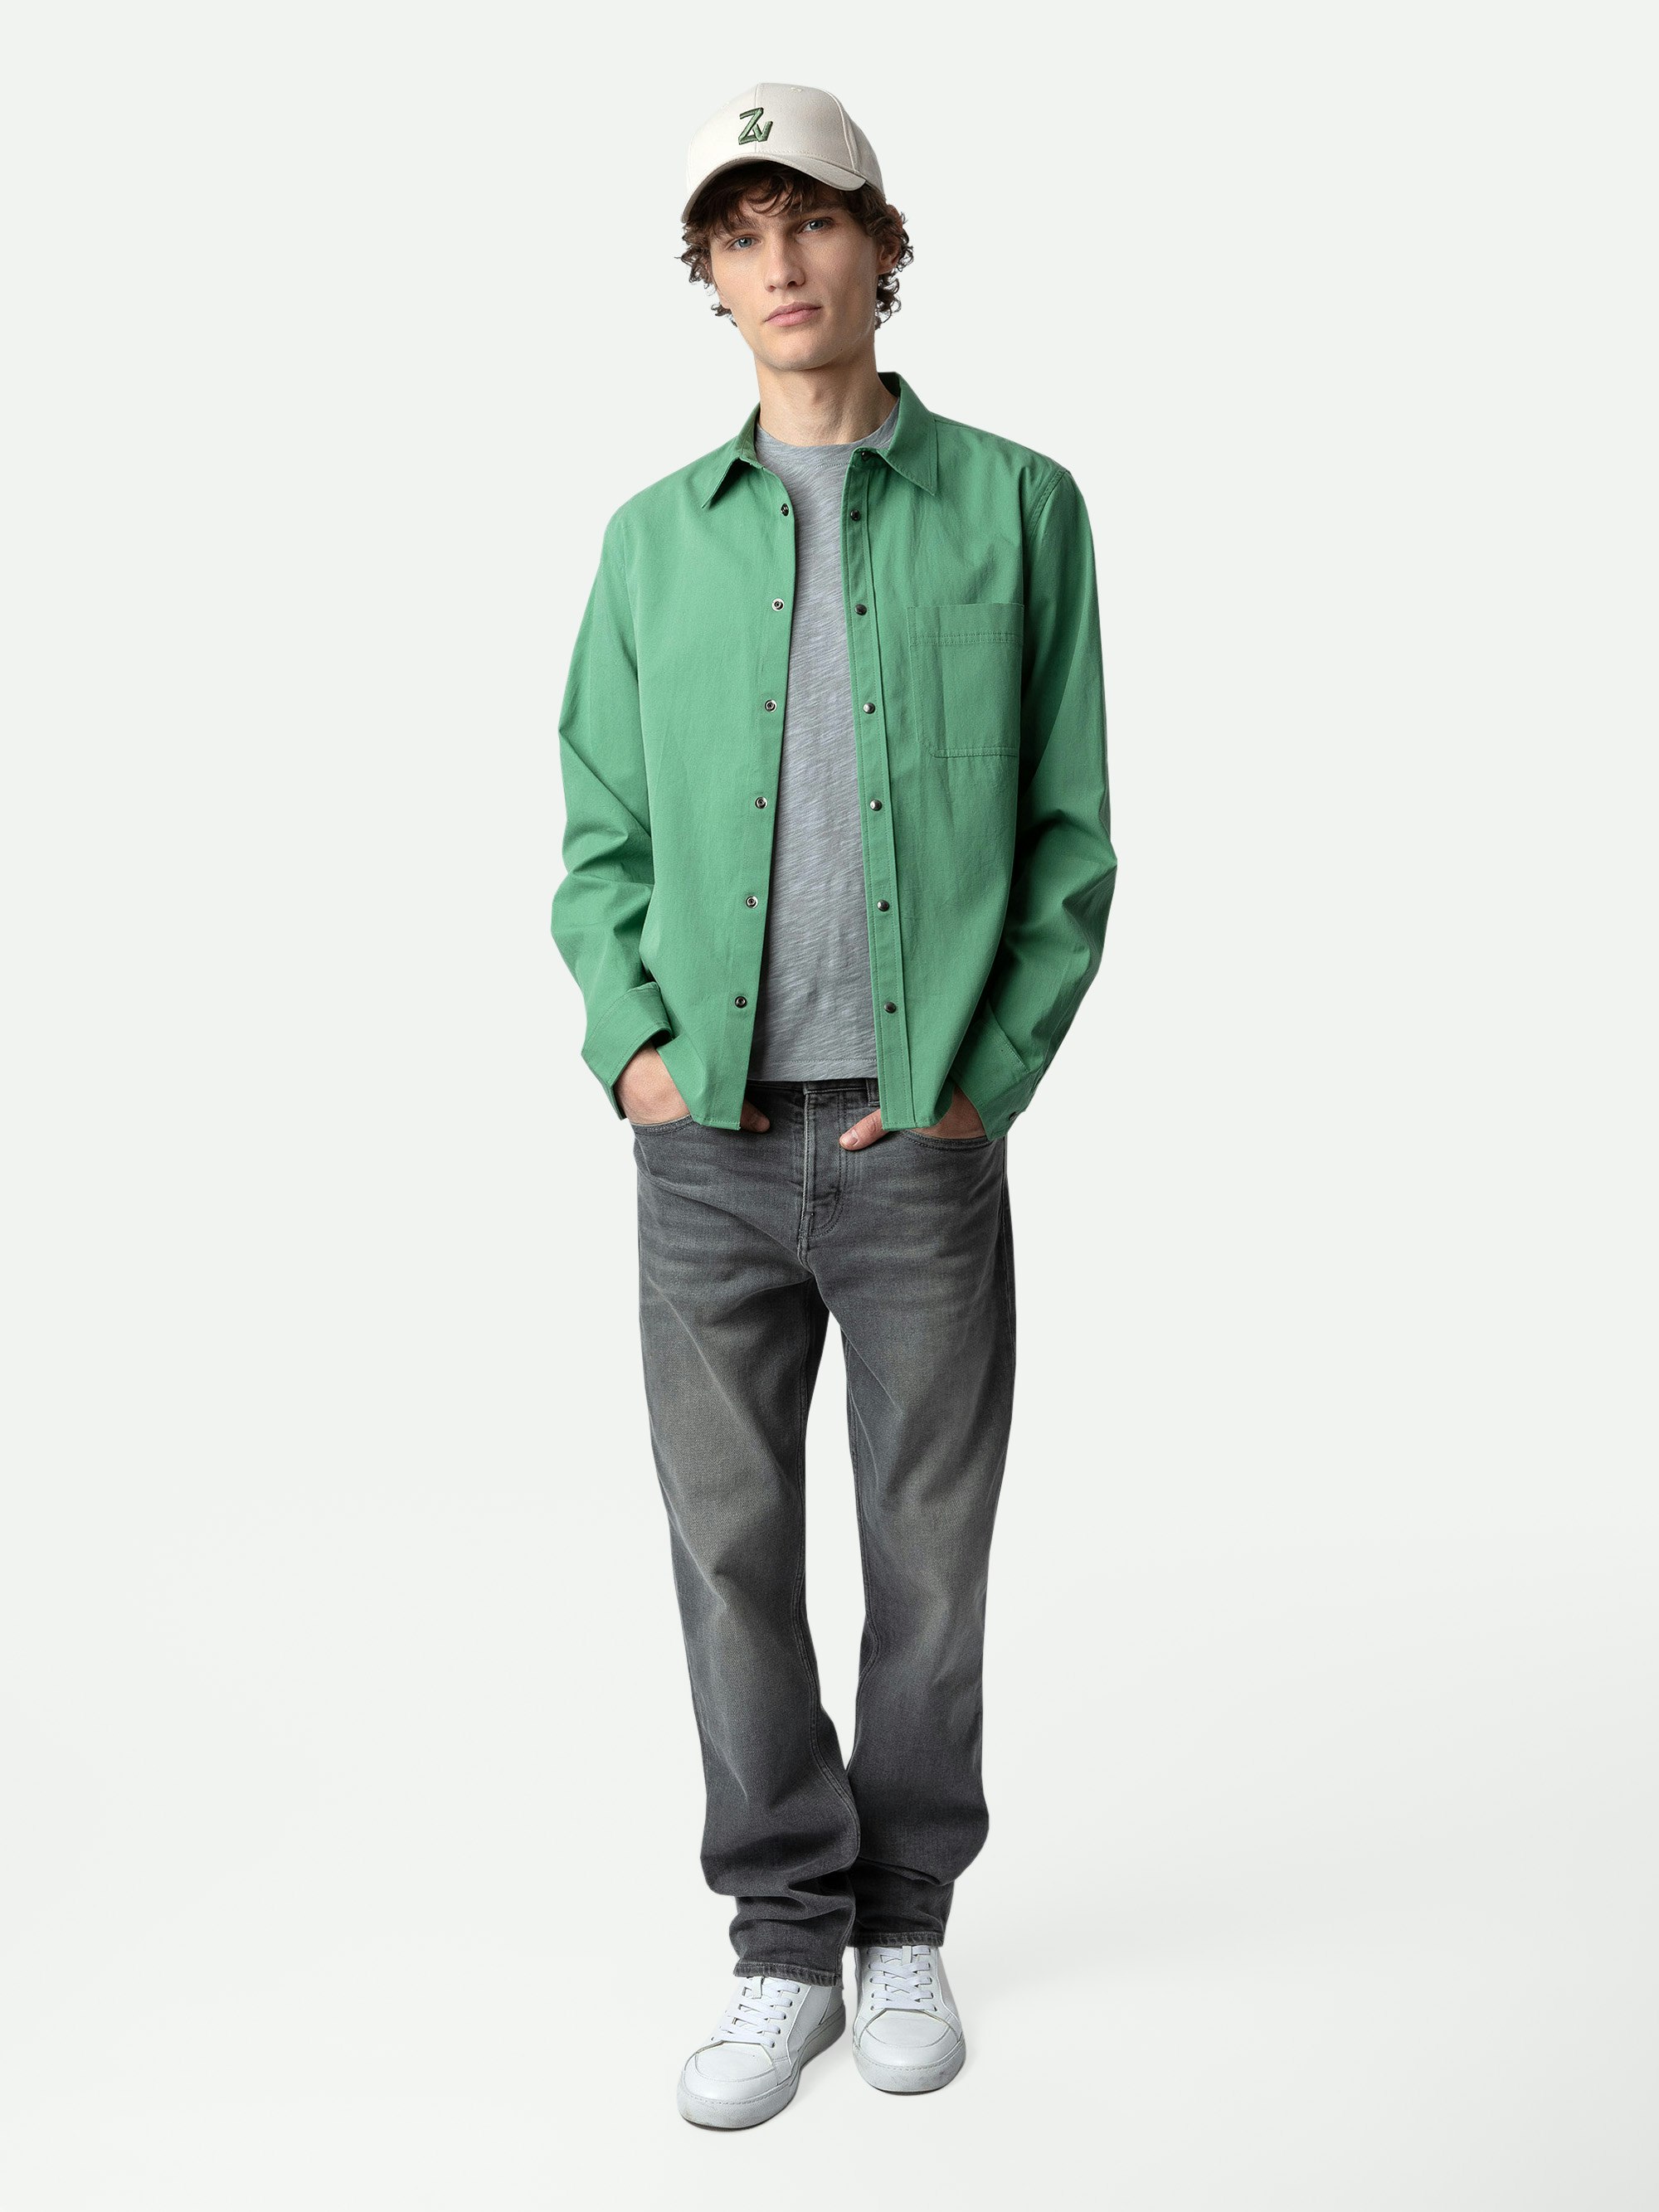 Stan Shirt - Green cotton twill shirt with patch pocket and customised details designed by Humberto Cruz.